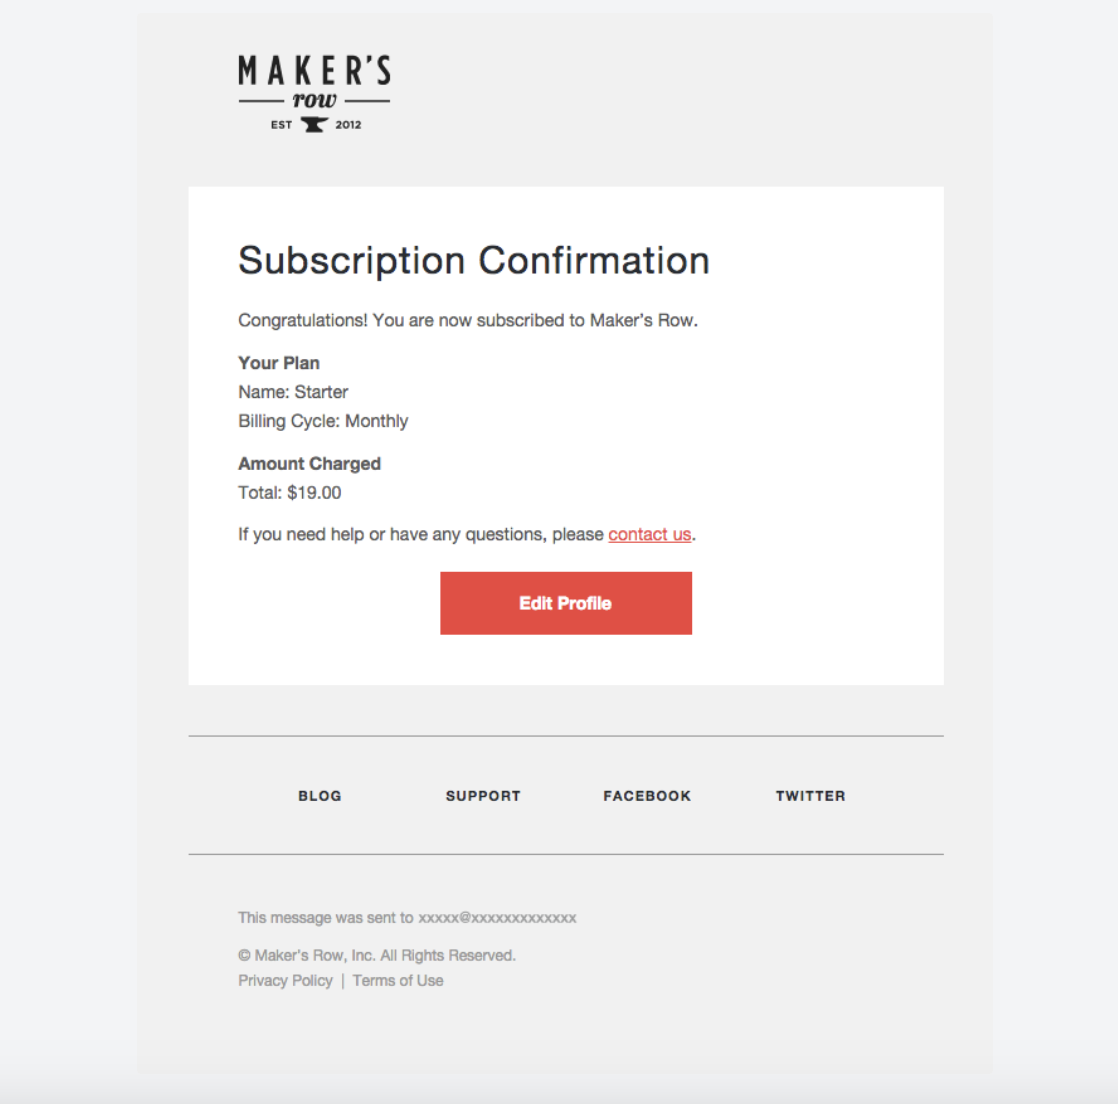 Transactional email examples: Maker's Row subscription confirmation email